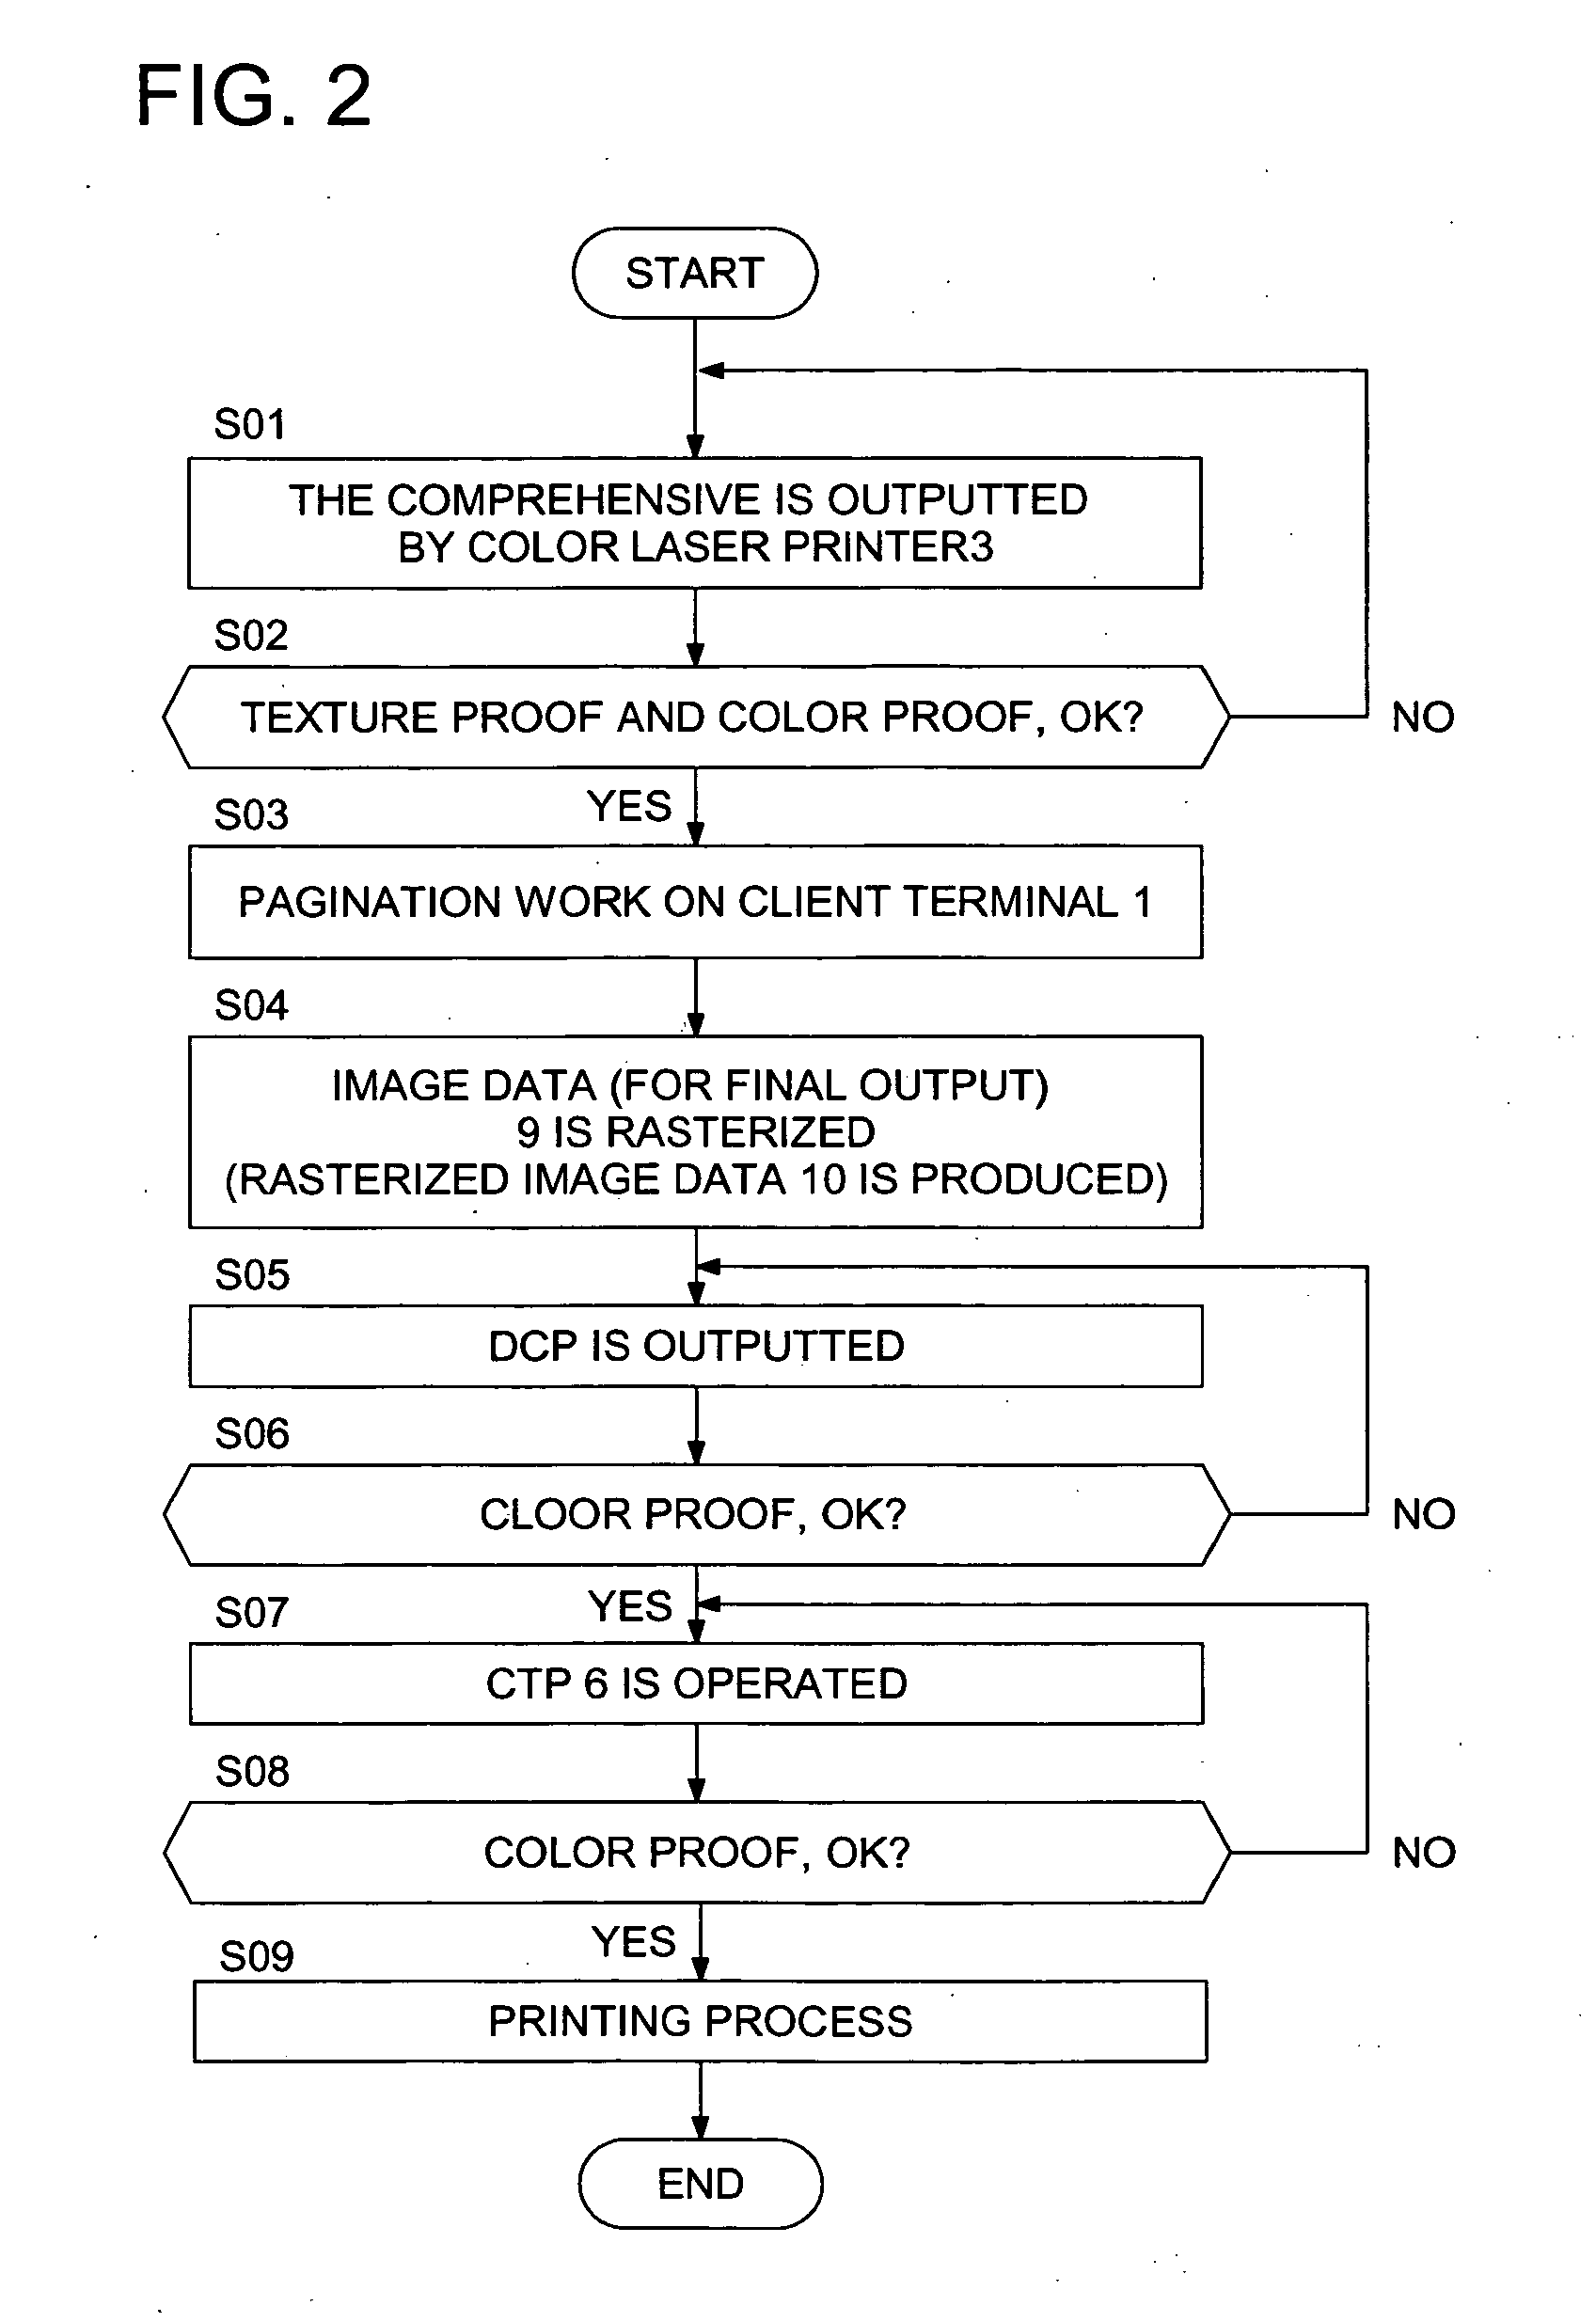 Image output control device